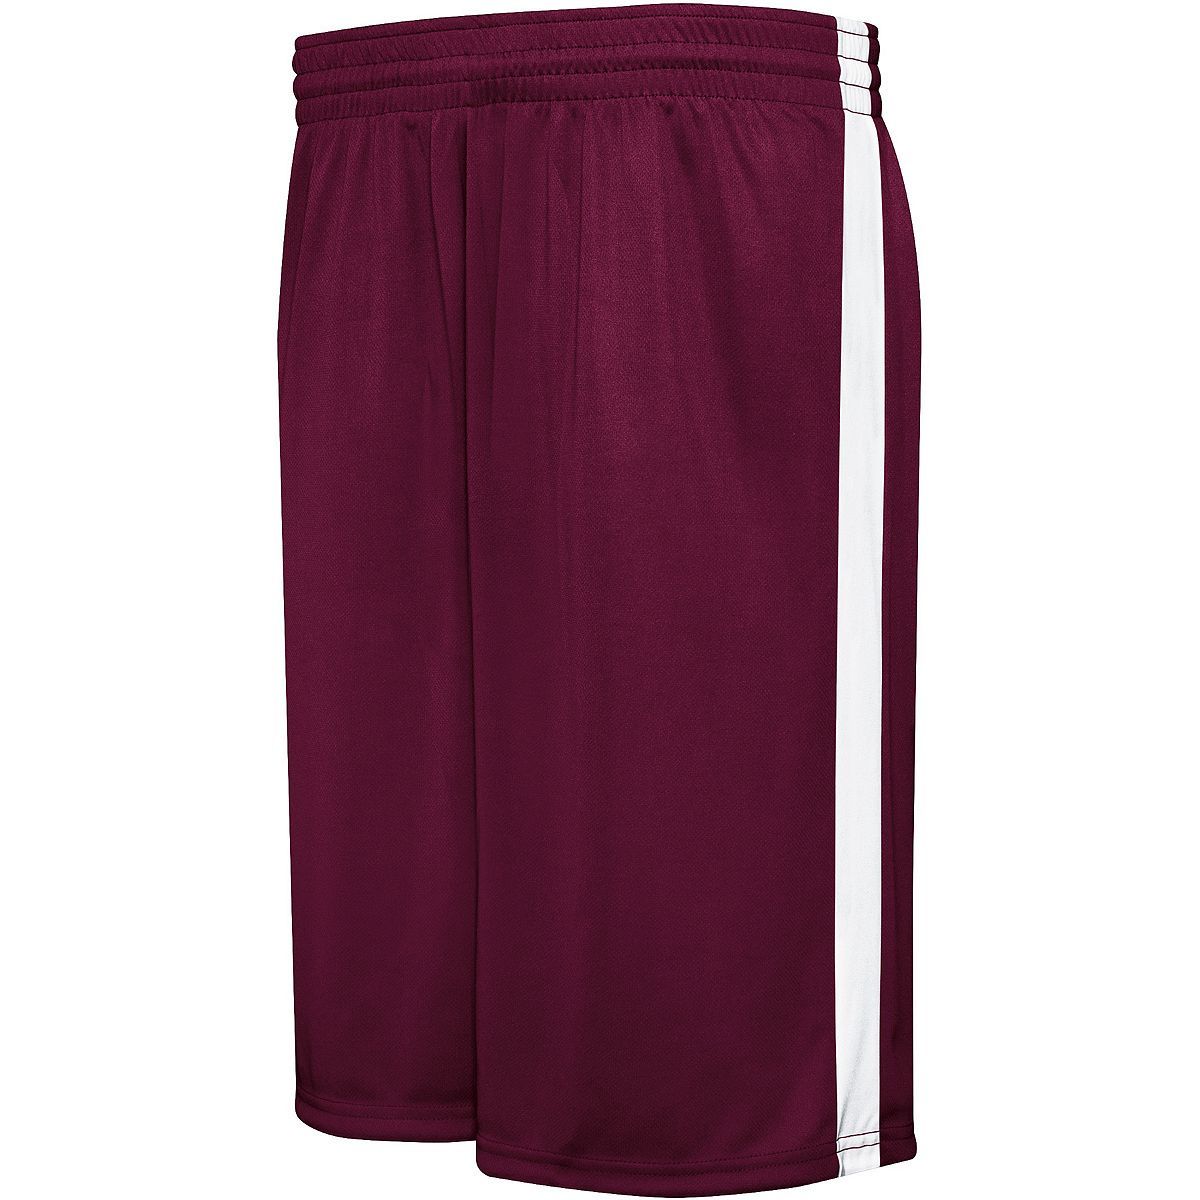 Augusta Sportswear Youth Competition Reversible Shorts in Maroon/White  -Part of the Youth, Youth-Shorts, Augusta-Products, Basketball, All-Sports, All-Sports-1 product lines at KanaleyCreations.com